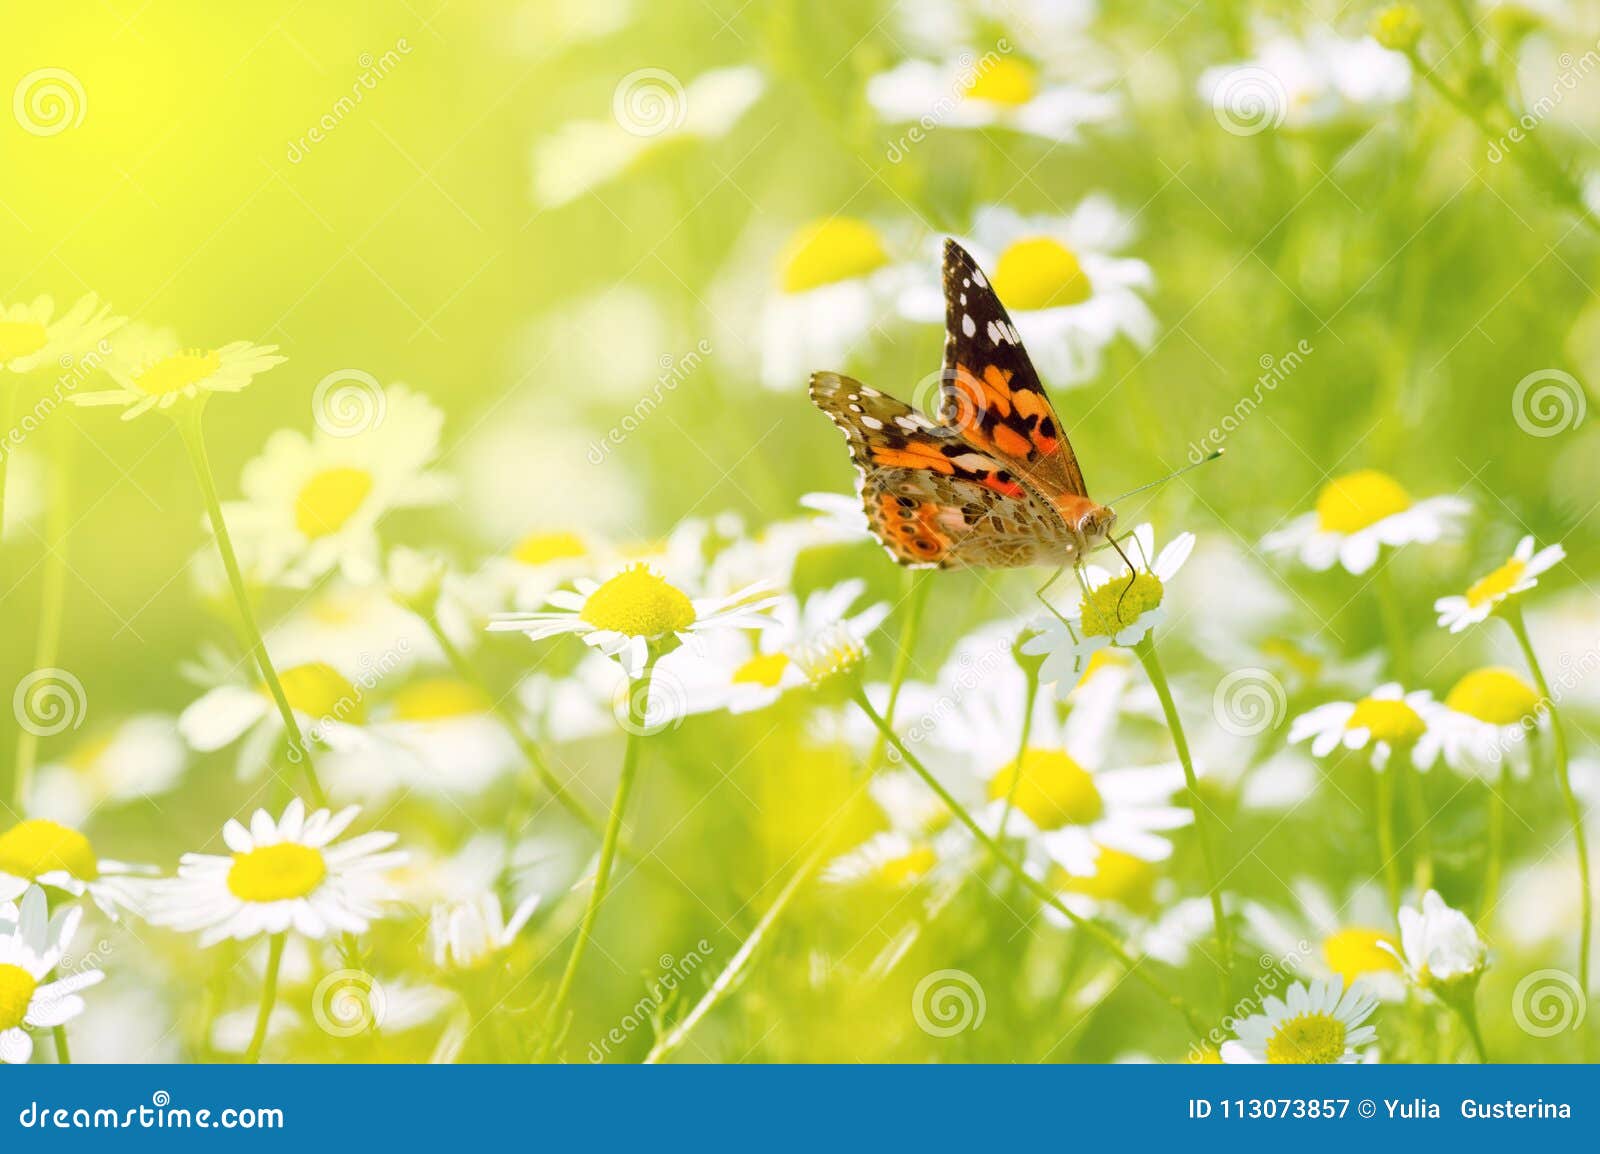 Beautiful Butterfly on a Flowering Field with Daisies. a Gentle ...